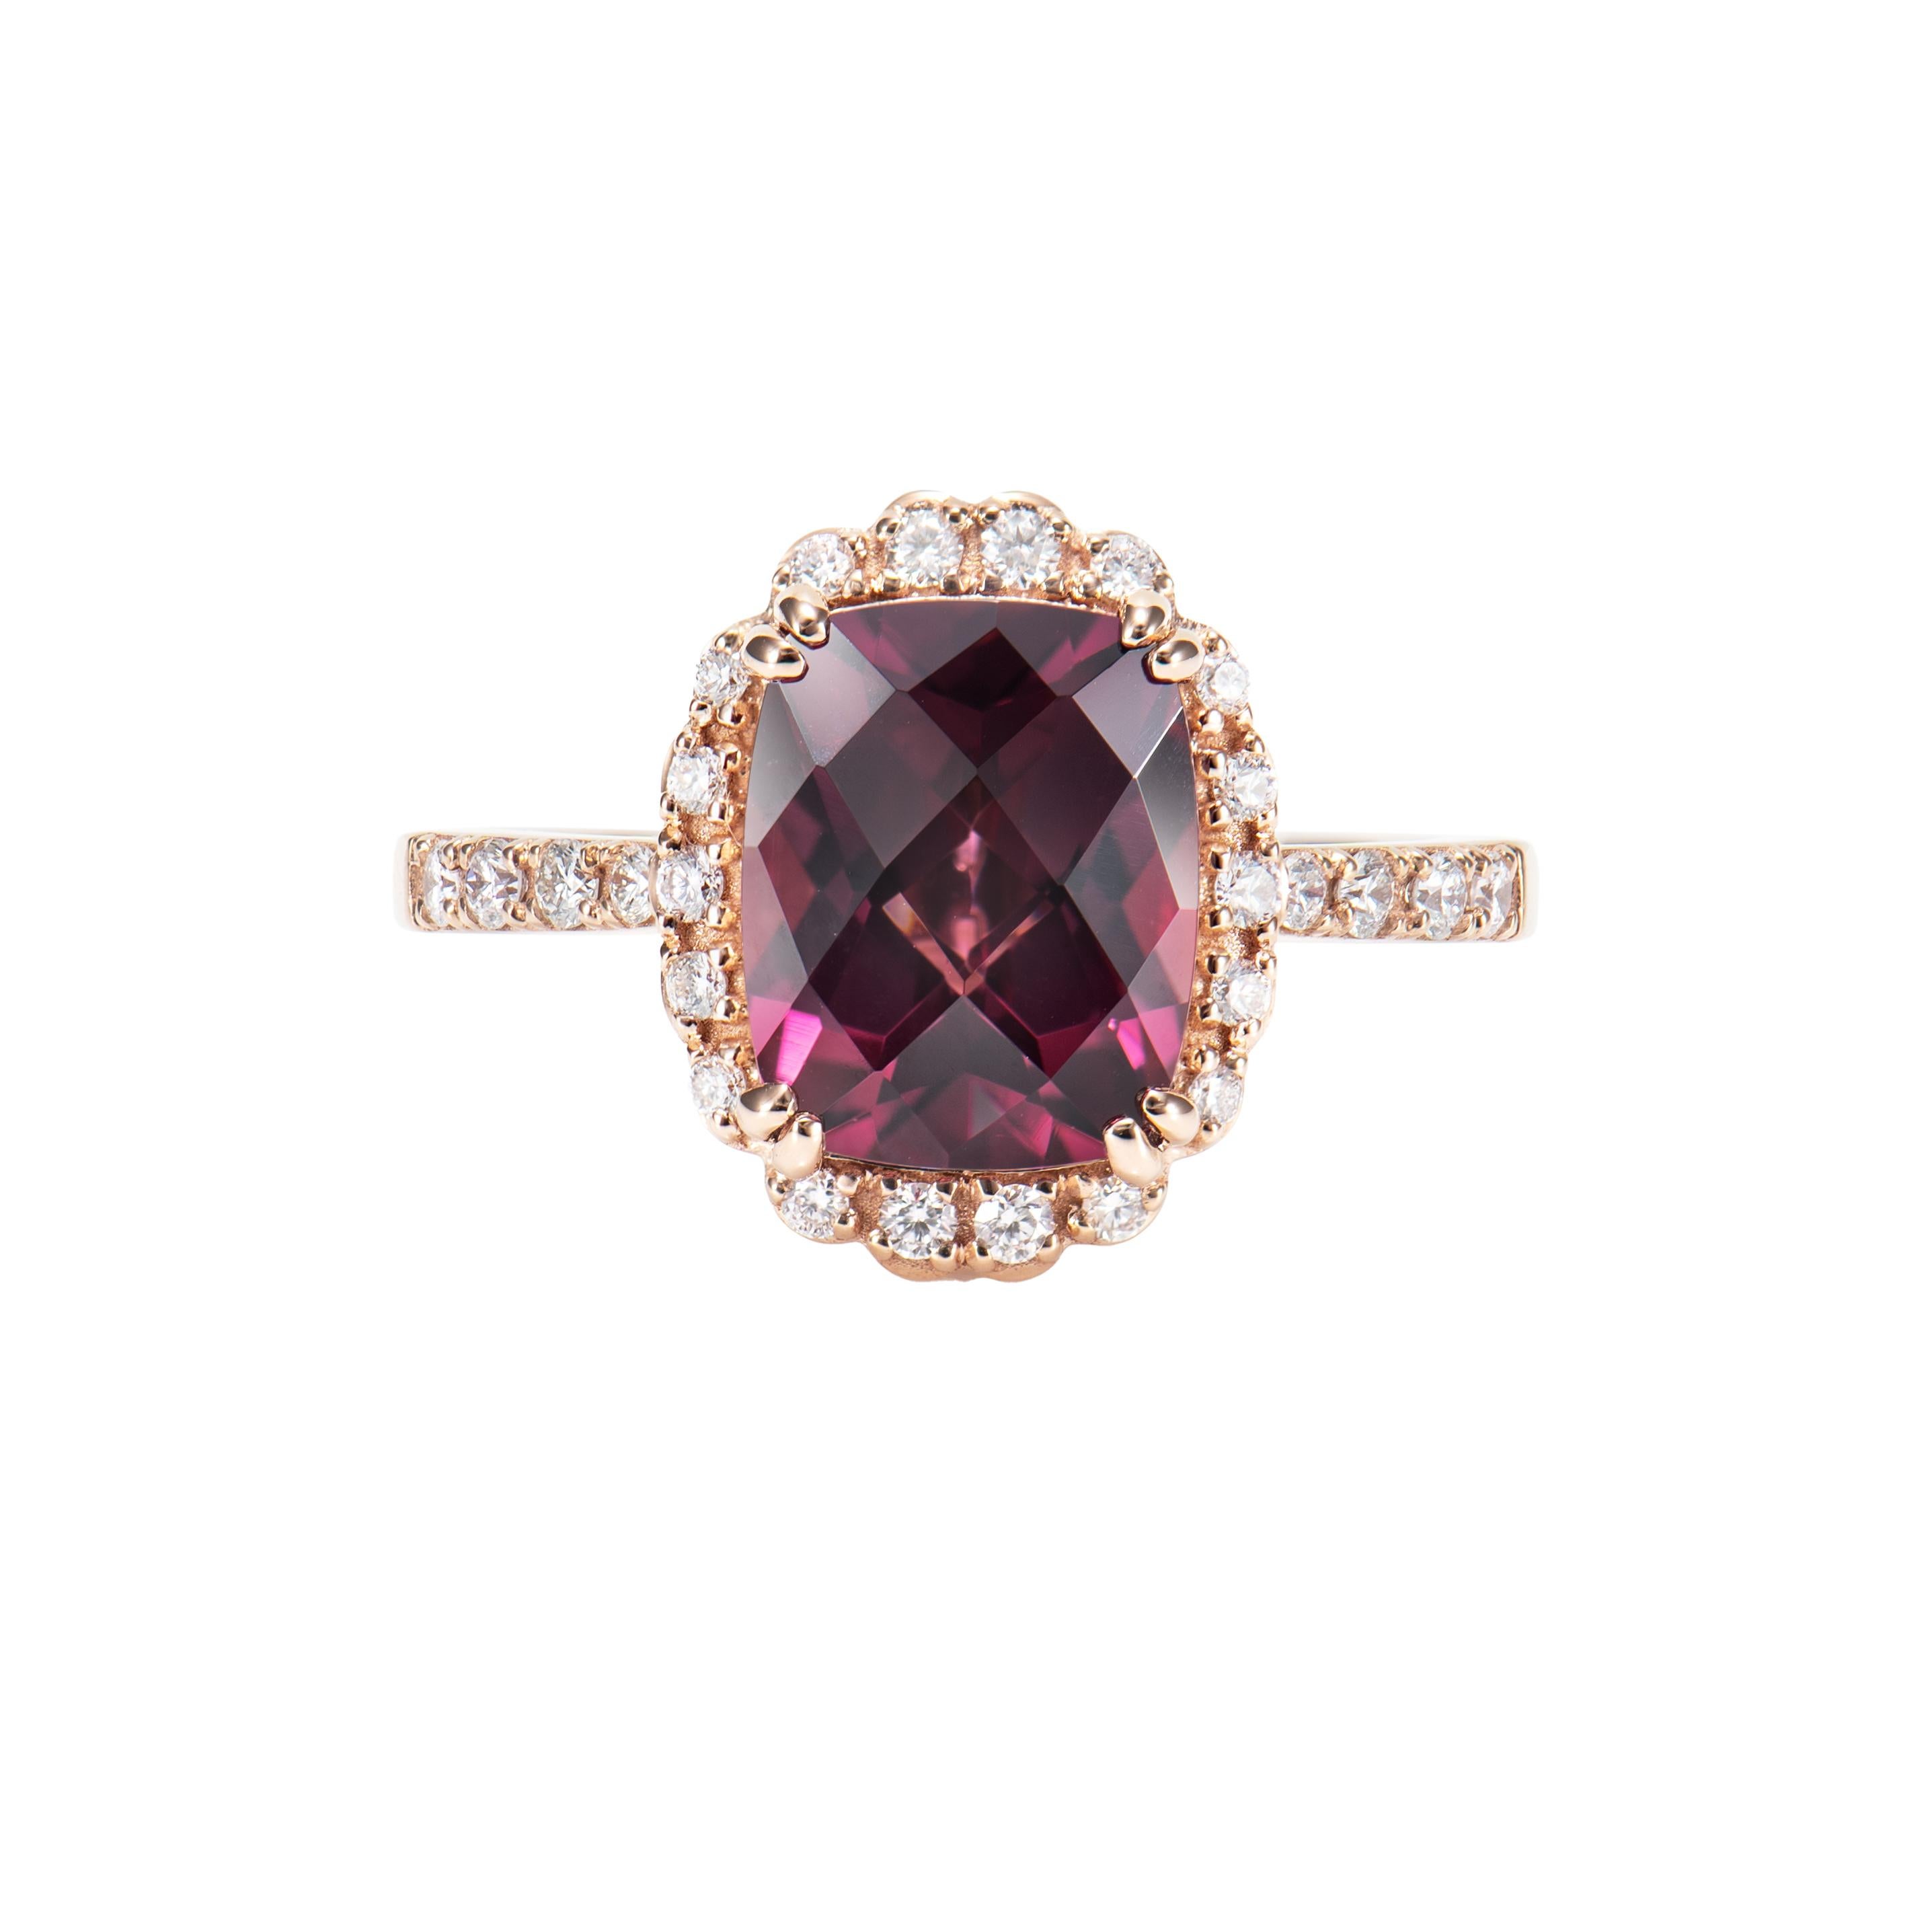 Contemporary 3.75 Carat Rhodolite Cocktail Ring in 18 Karat Rose Gold with Diamond. For Sale